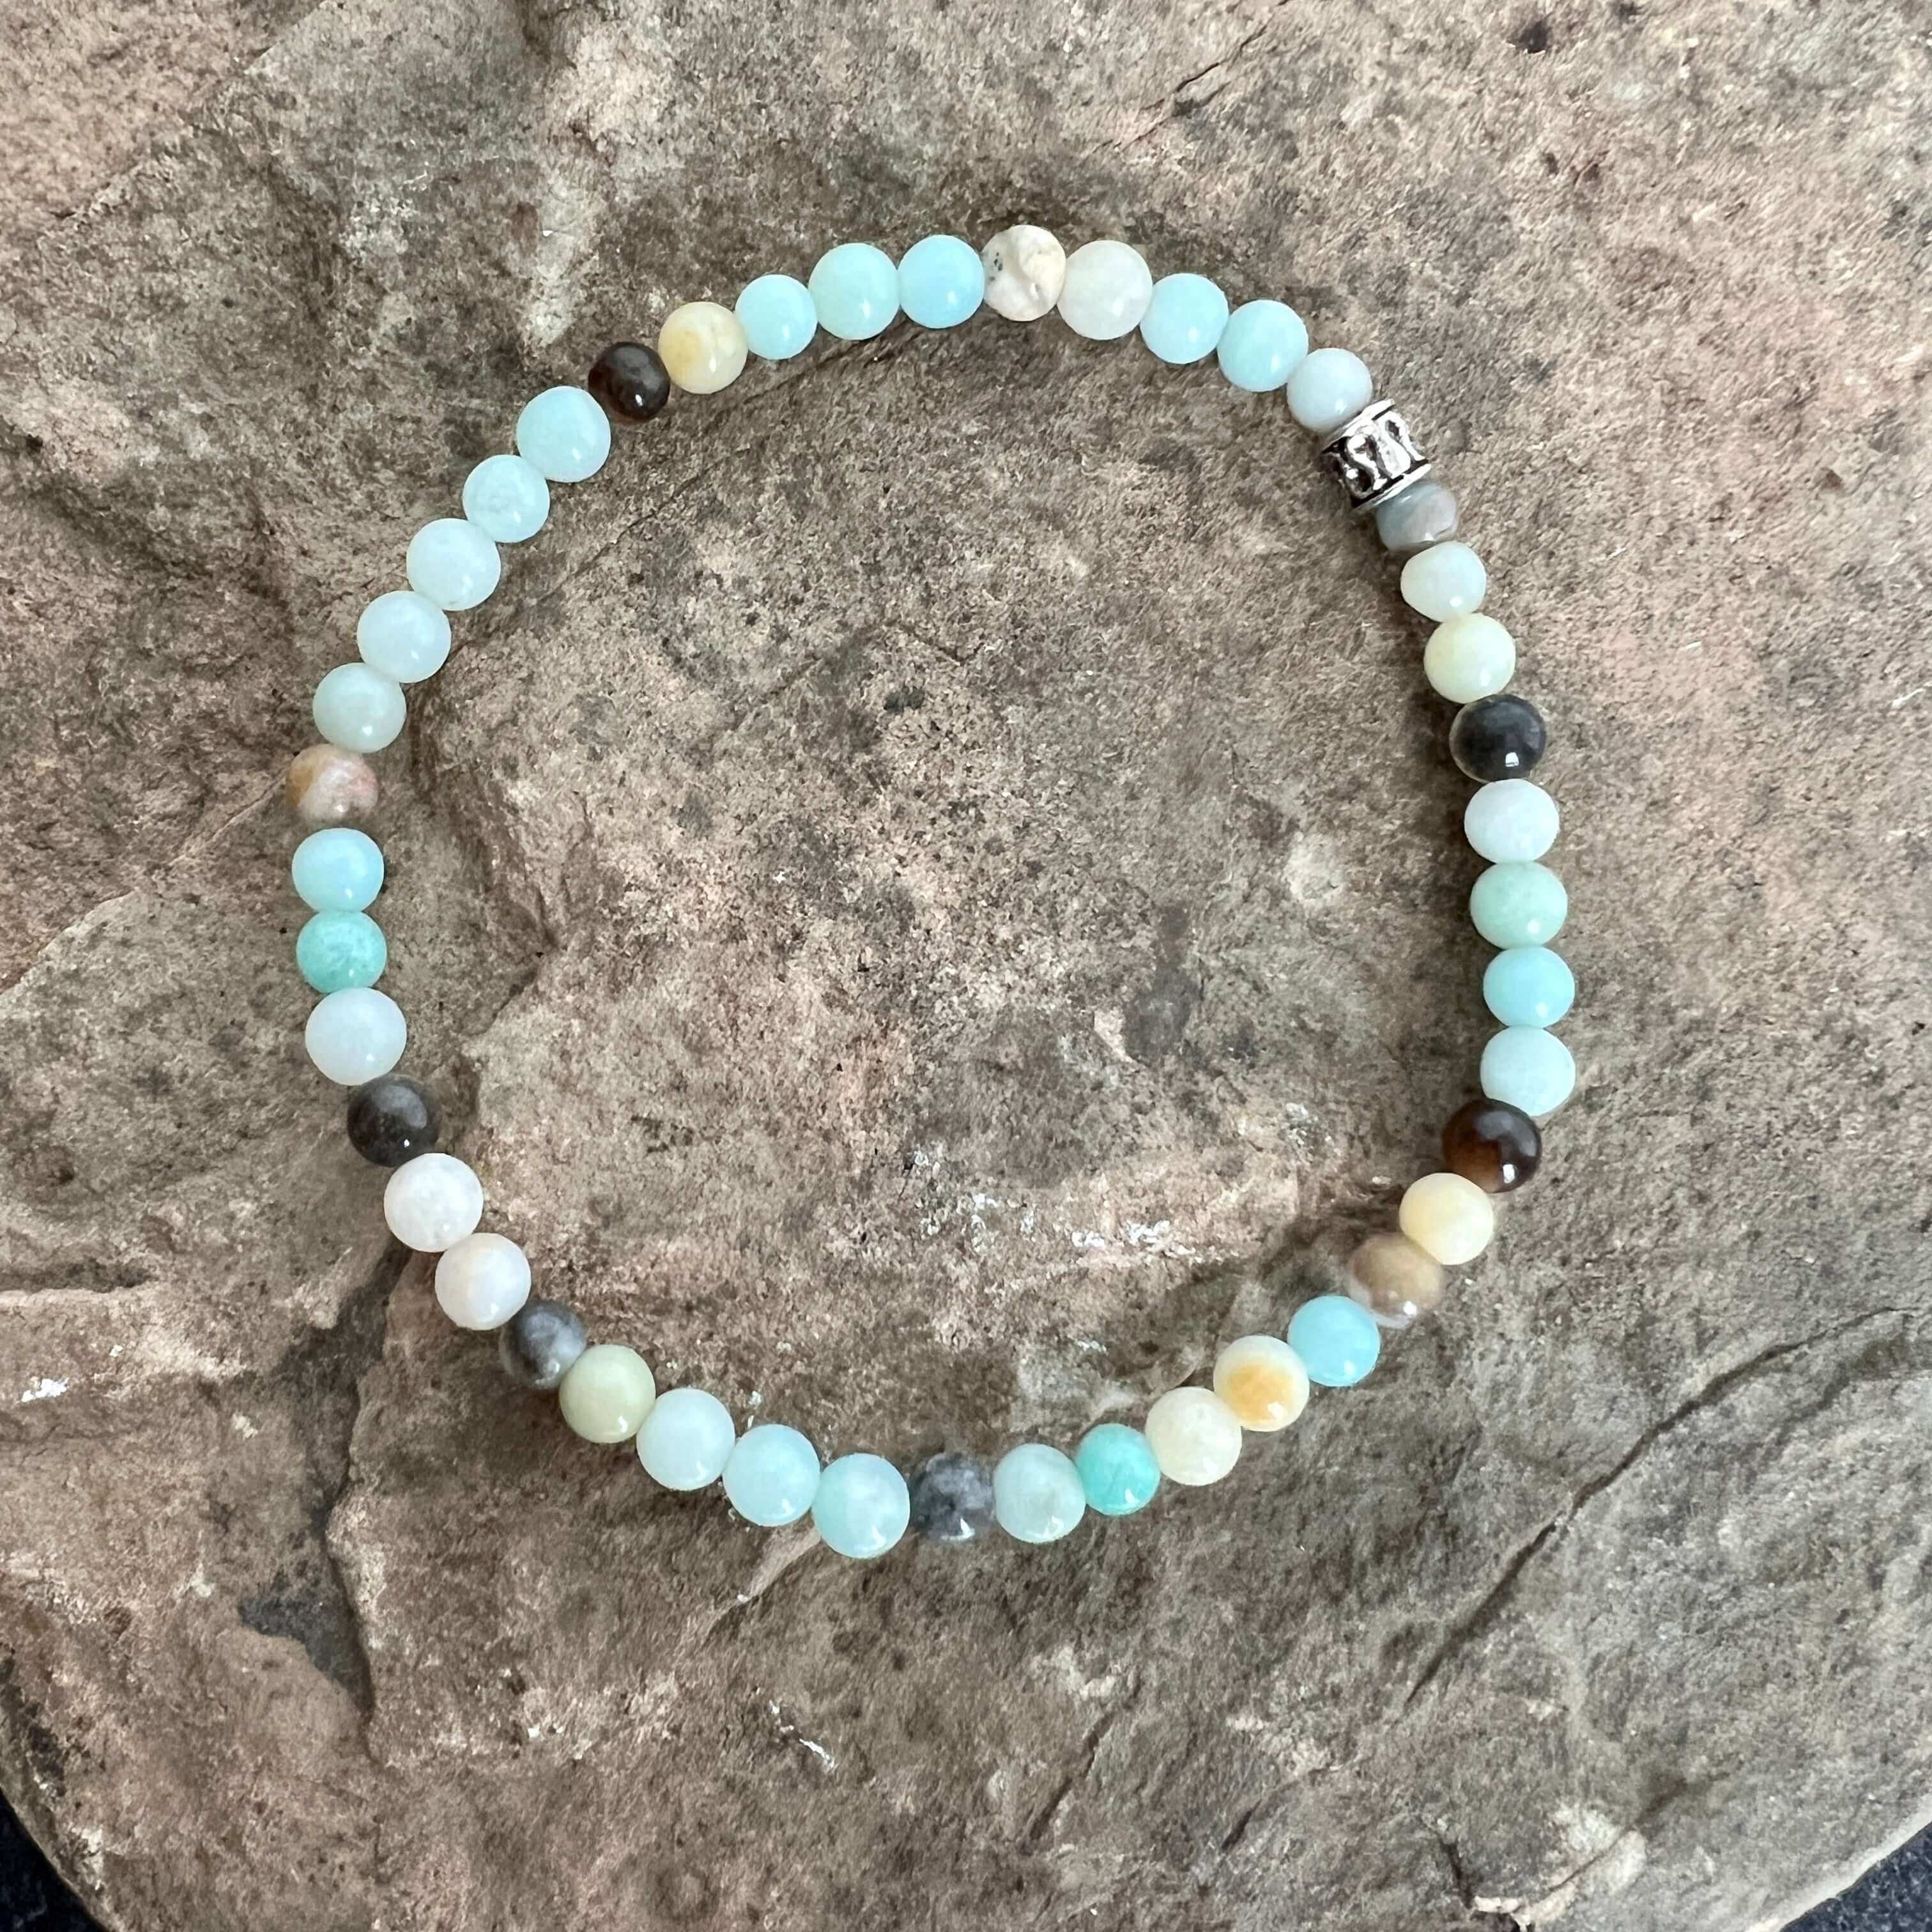 Black Gold Amazonite Bracelet This bracelet is made with high-quality Black Gold Amazonite stones which bring inspiration and calm to the wearer. Zodiac Sign: Virgo. Chakras: Heart and Throat. Handmade with authentic crystals and gemstones in Minneapolis,